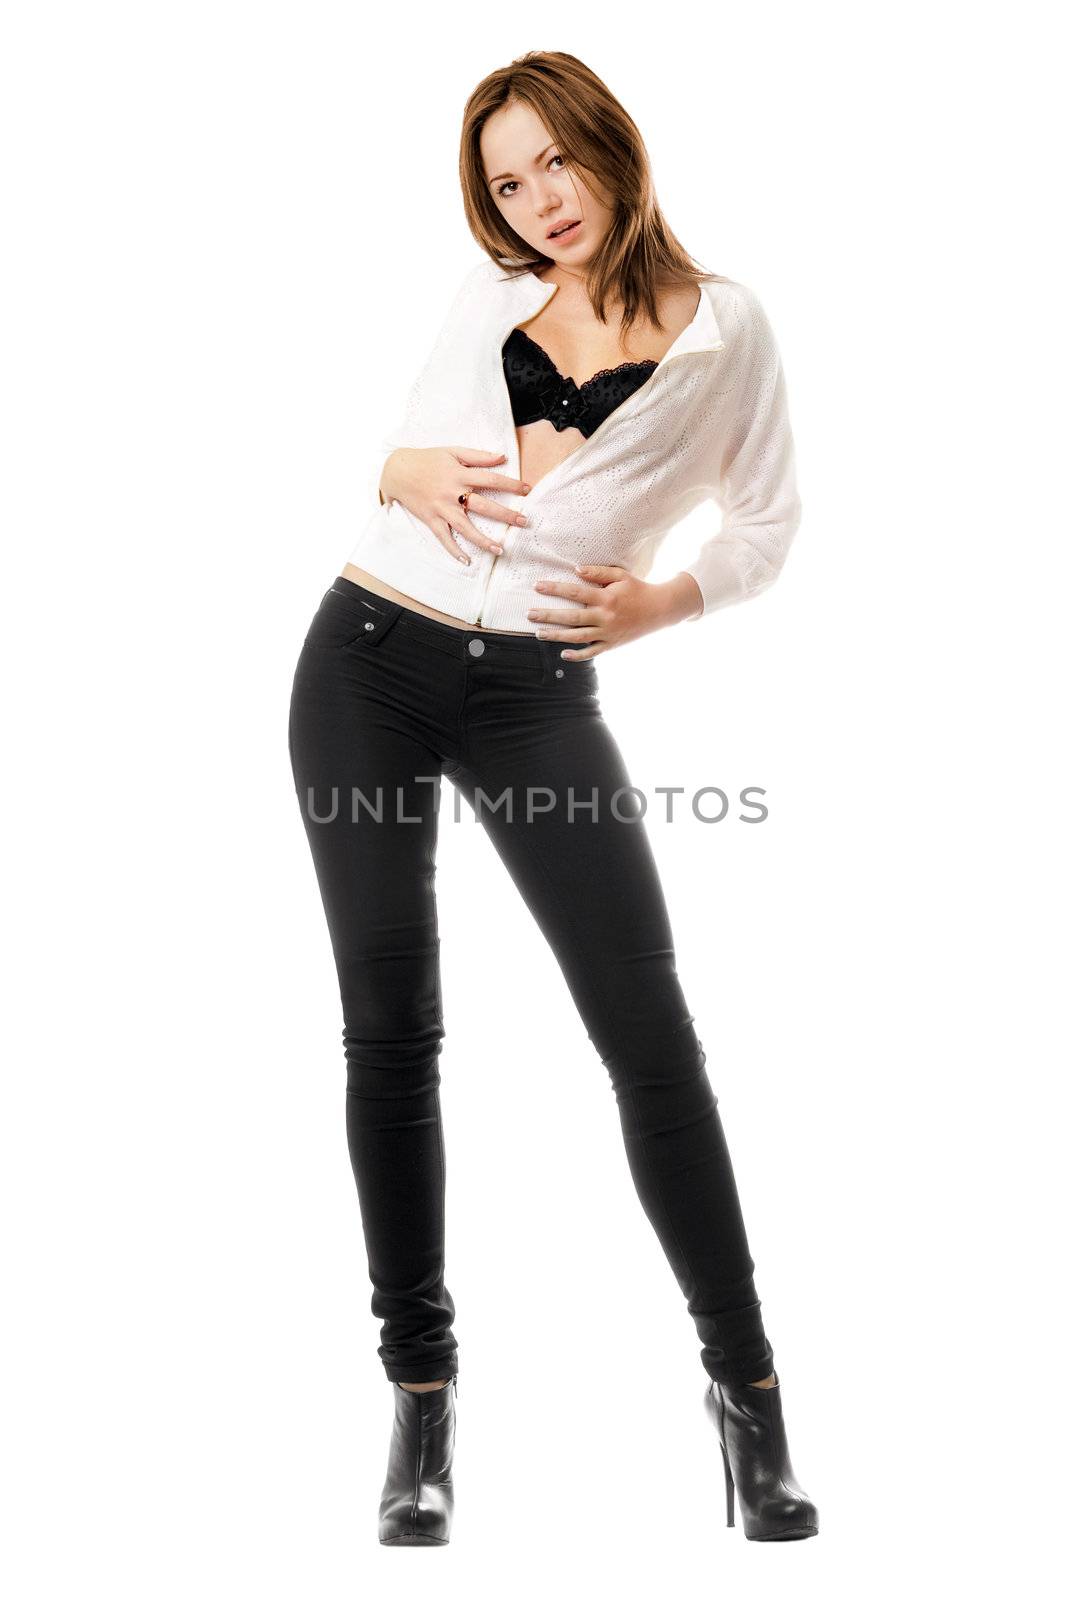 Young woman in black tight jeans. Isolated on white